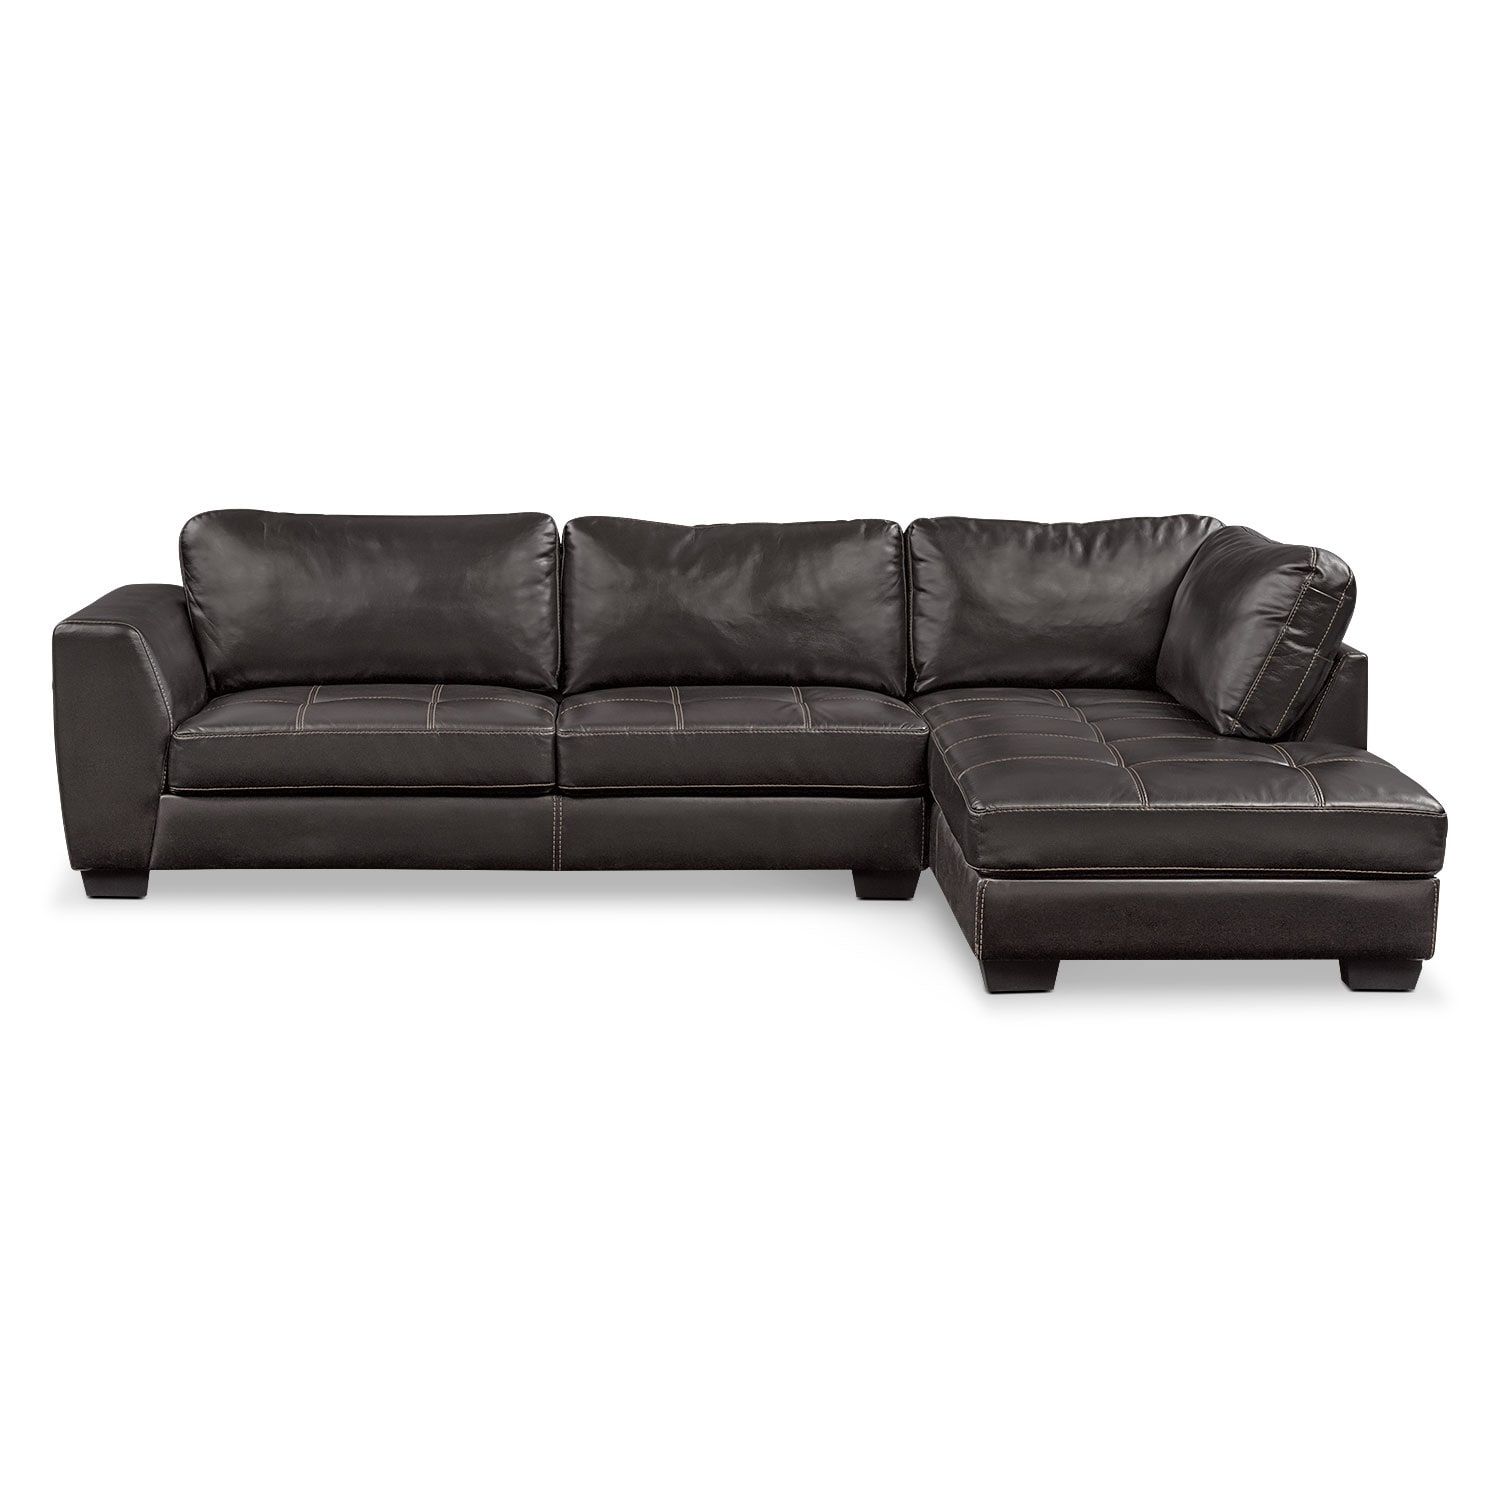 Santana 2 Piece Sectional With Right Facing Chaise – Black | Value City Pertaining To Right Facing Black Sofas (Gallery 4 of 20)